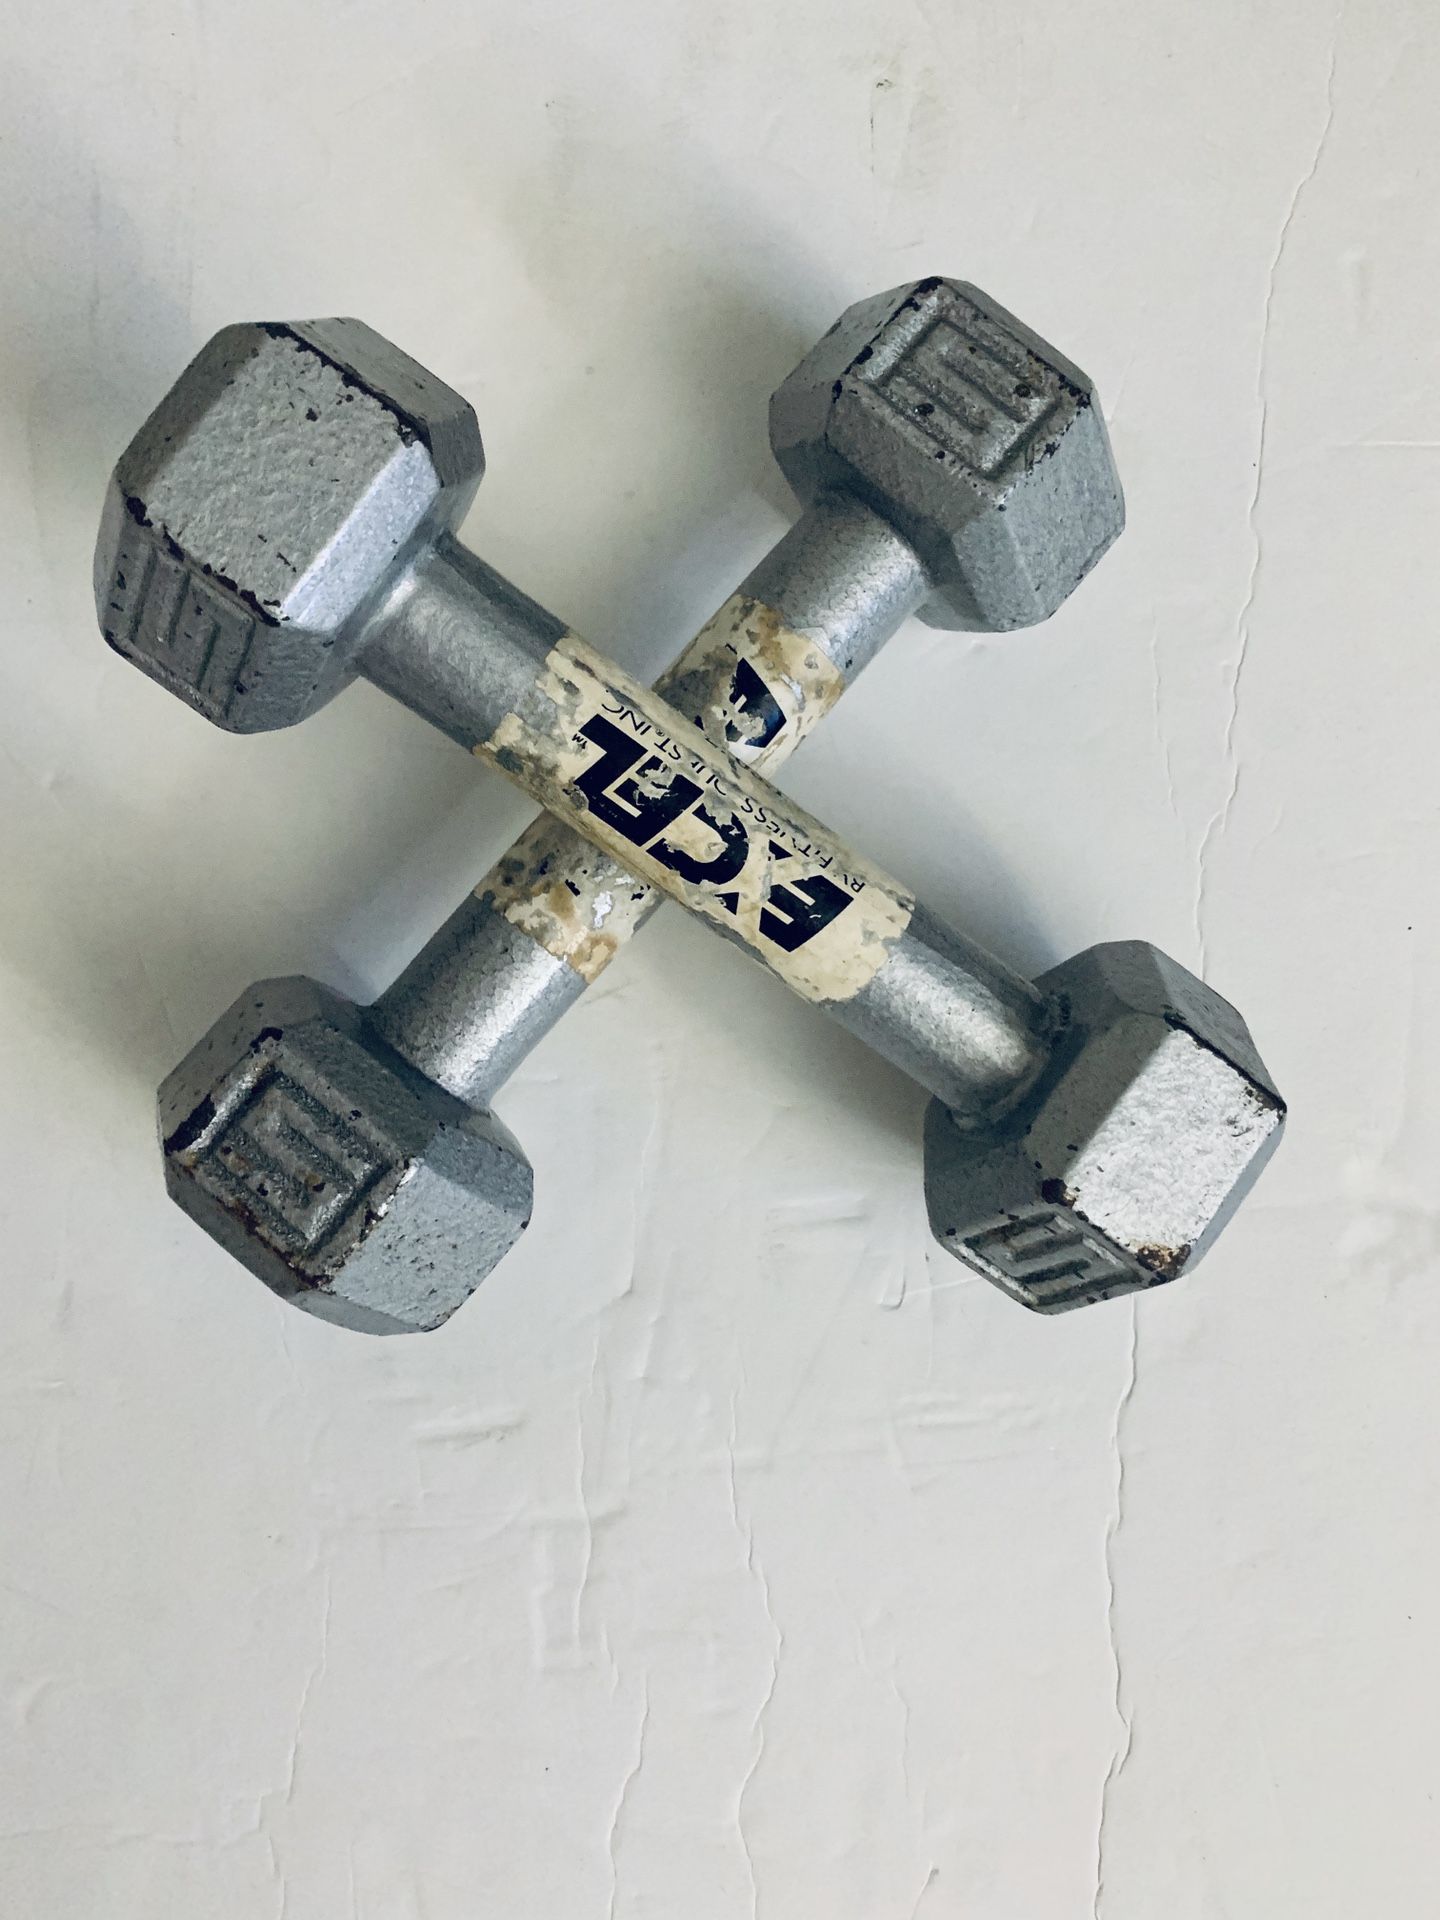 x2 5Lb Cast Iron Hex Dumbbell Hand Weight Pair Set = 10 Pounds Fitness Training!